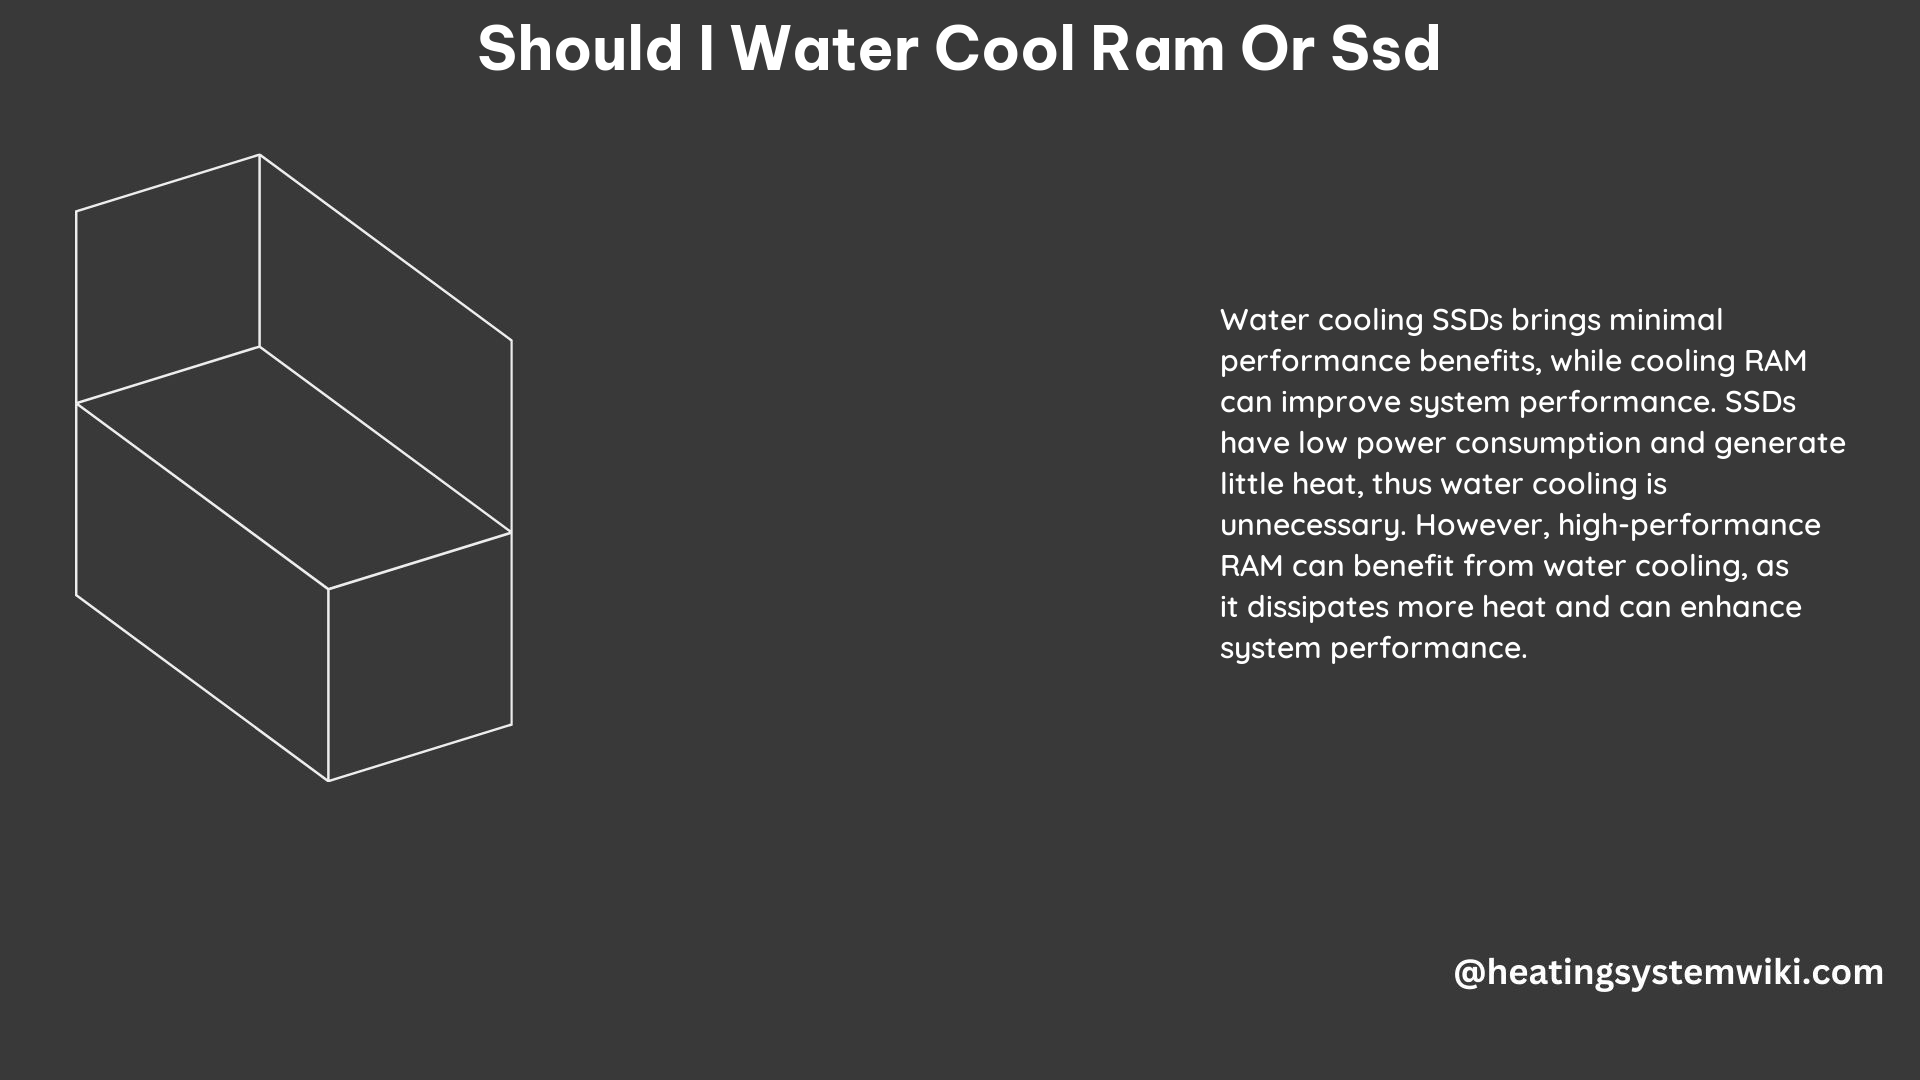 Should I Water Cool Ram or SSD